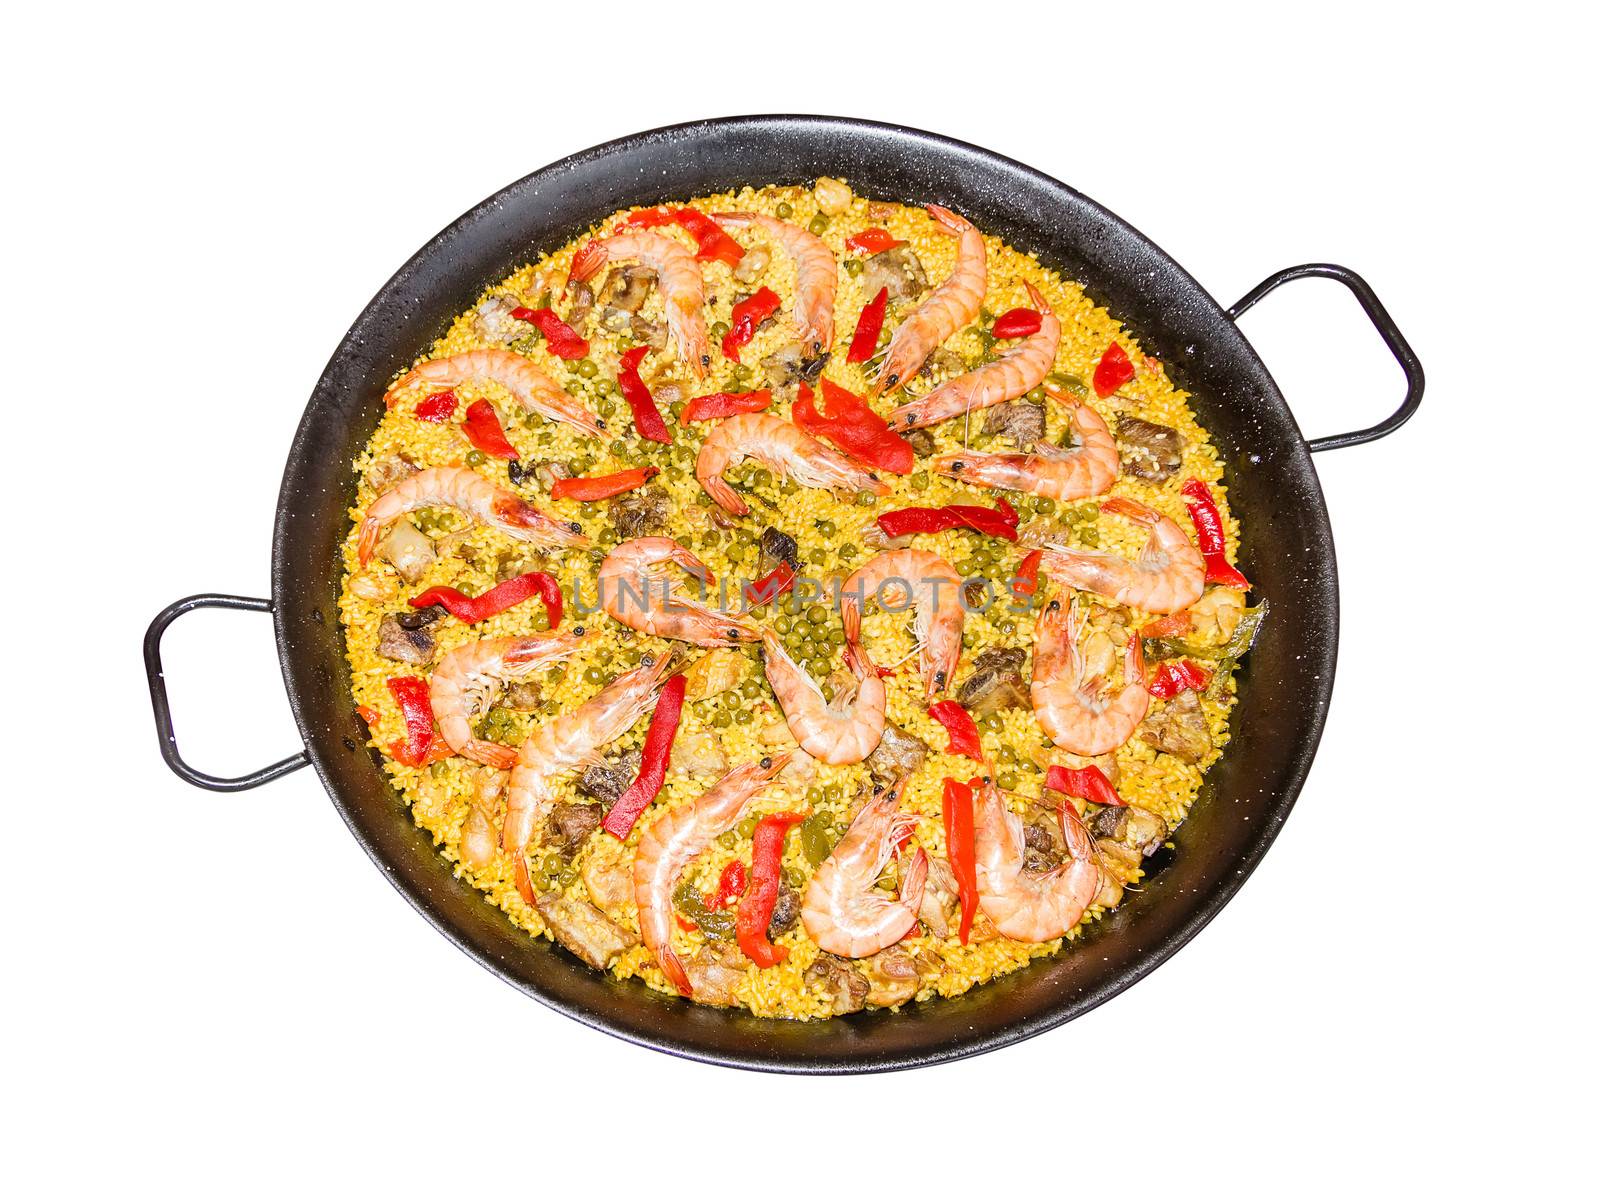 Traditional spanish paella cooked in a pan, with yellow rice and seafood, isolated on white background